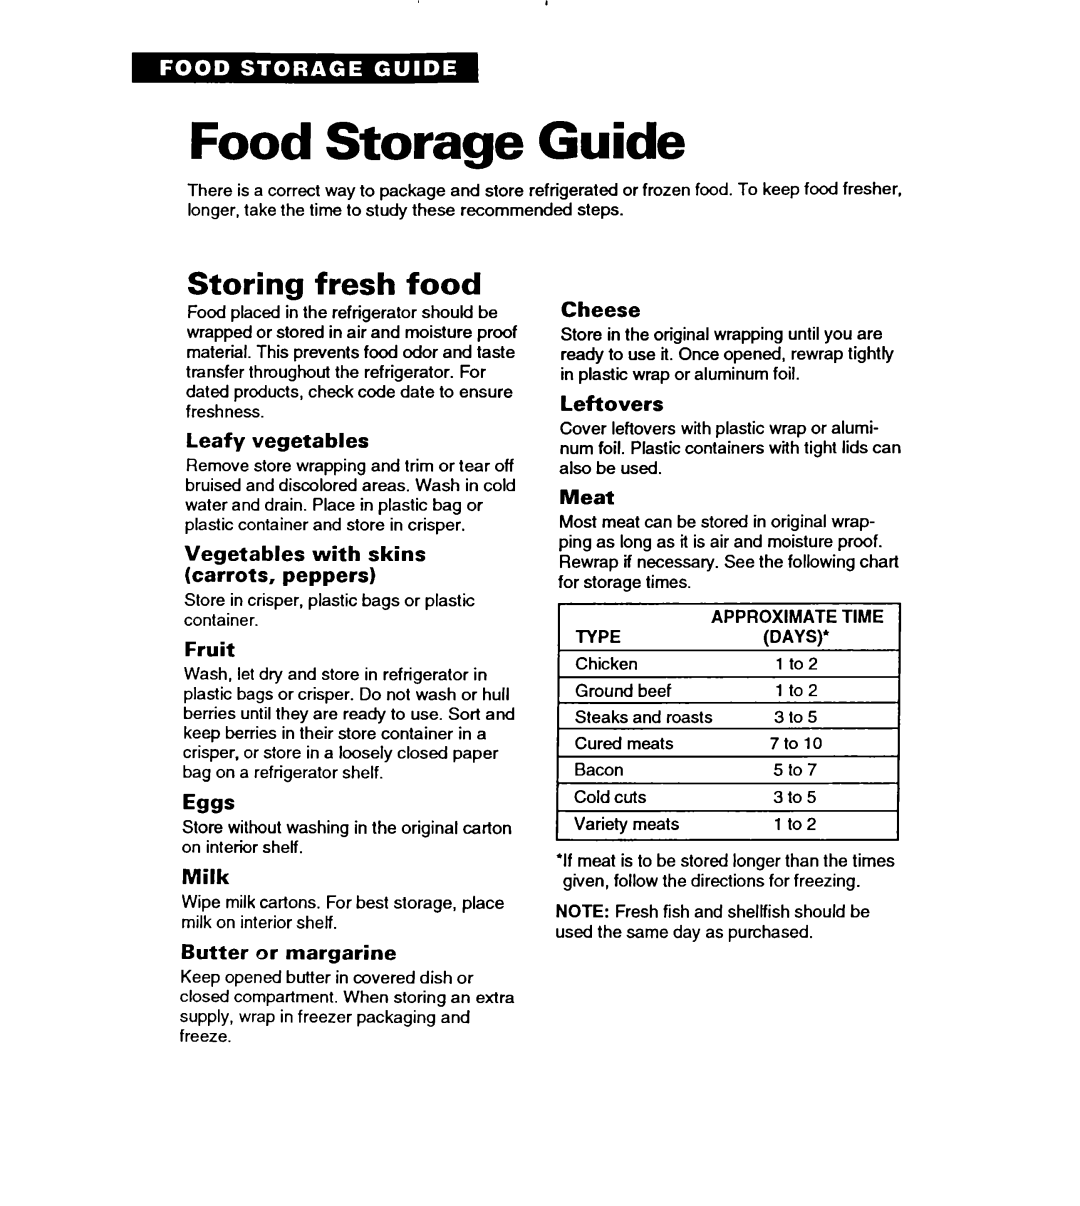 Whirlpool ET22DQ Food Storage Guide, Storing fresh food, Leafy vegetables, Vegetables with skins carrots, peppers, Fruit 